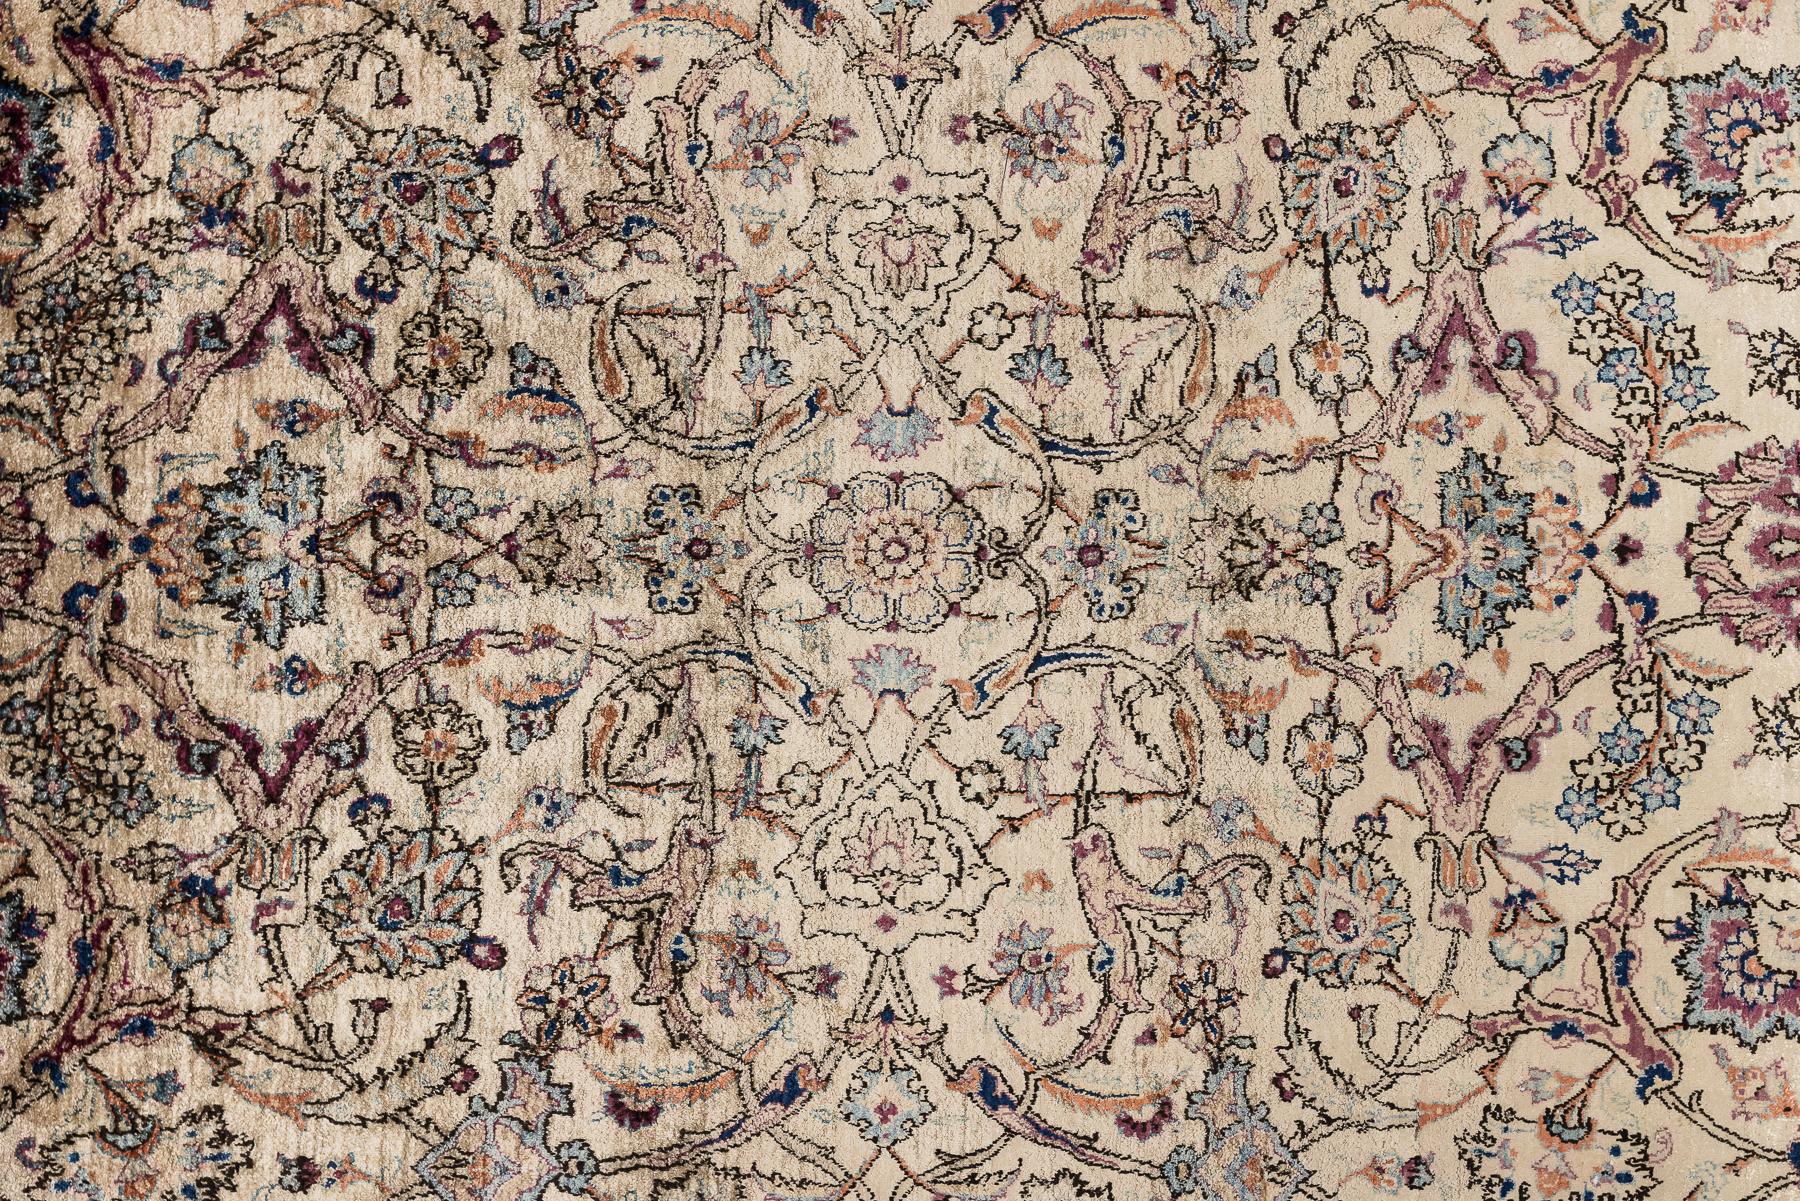 Silk Kashan - Central Persia

This attractive Kashan silk rug, made in Central Persia, was woven around 1950-1960 with a floral design that covers all its area. The field in ivory with the floral motif gives the viewer a feeling of lightness and